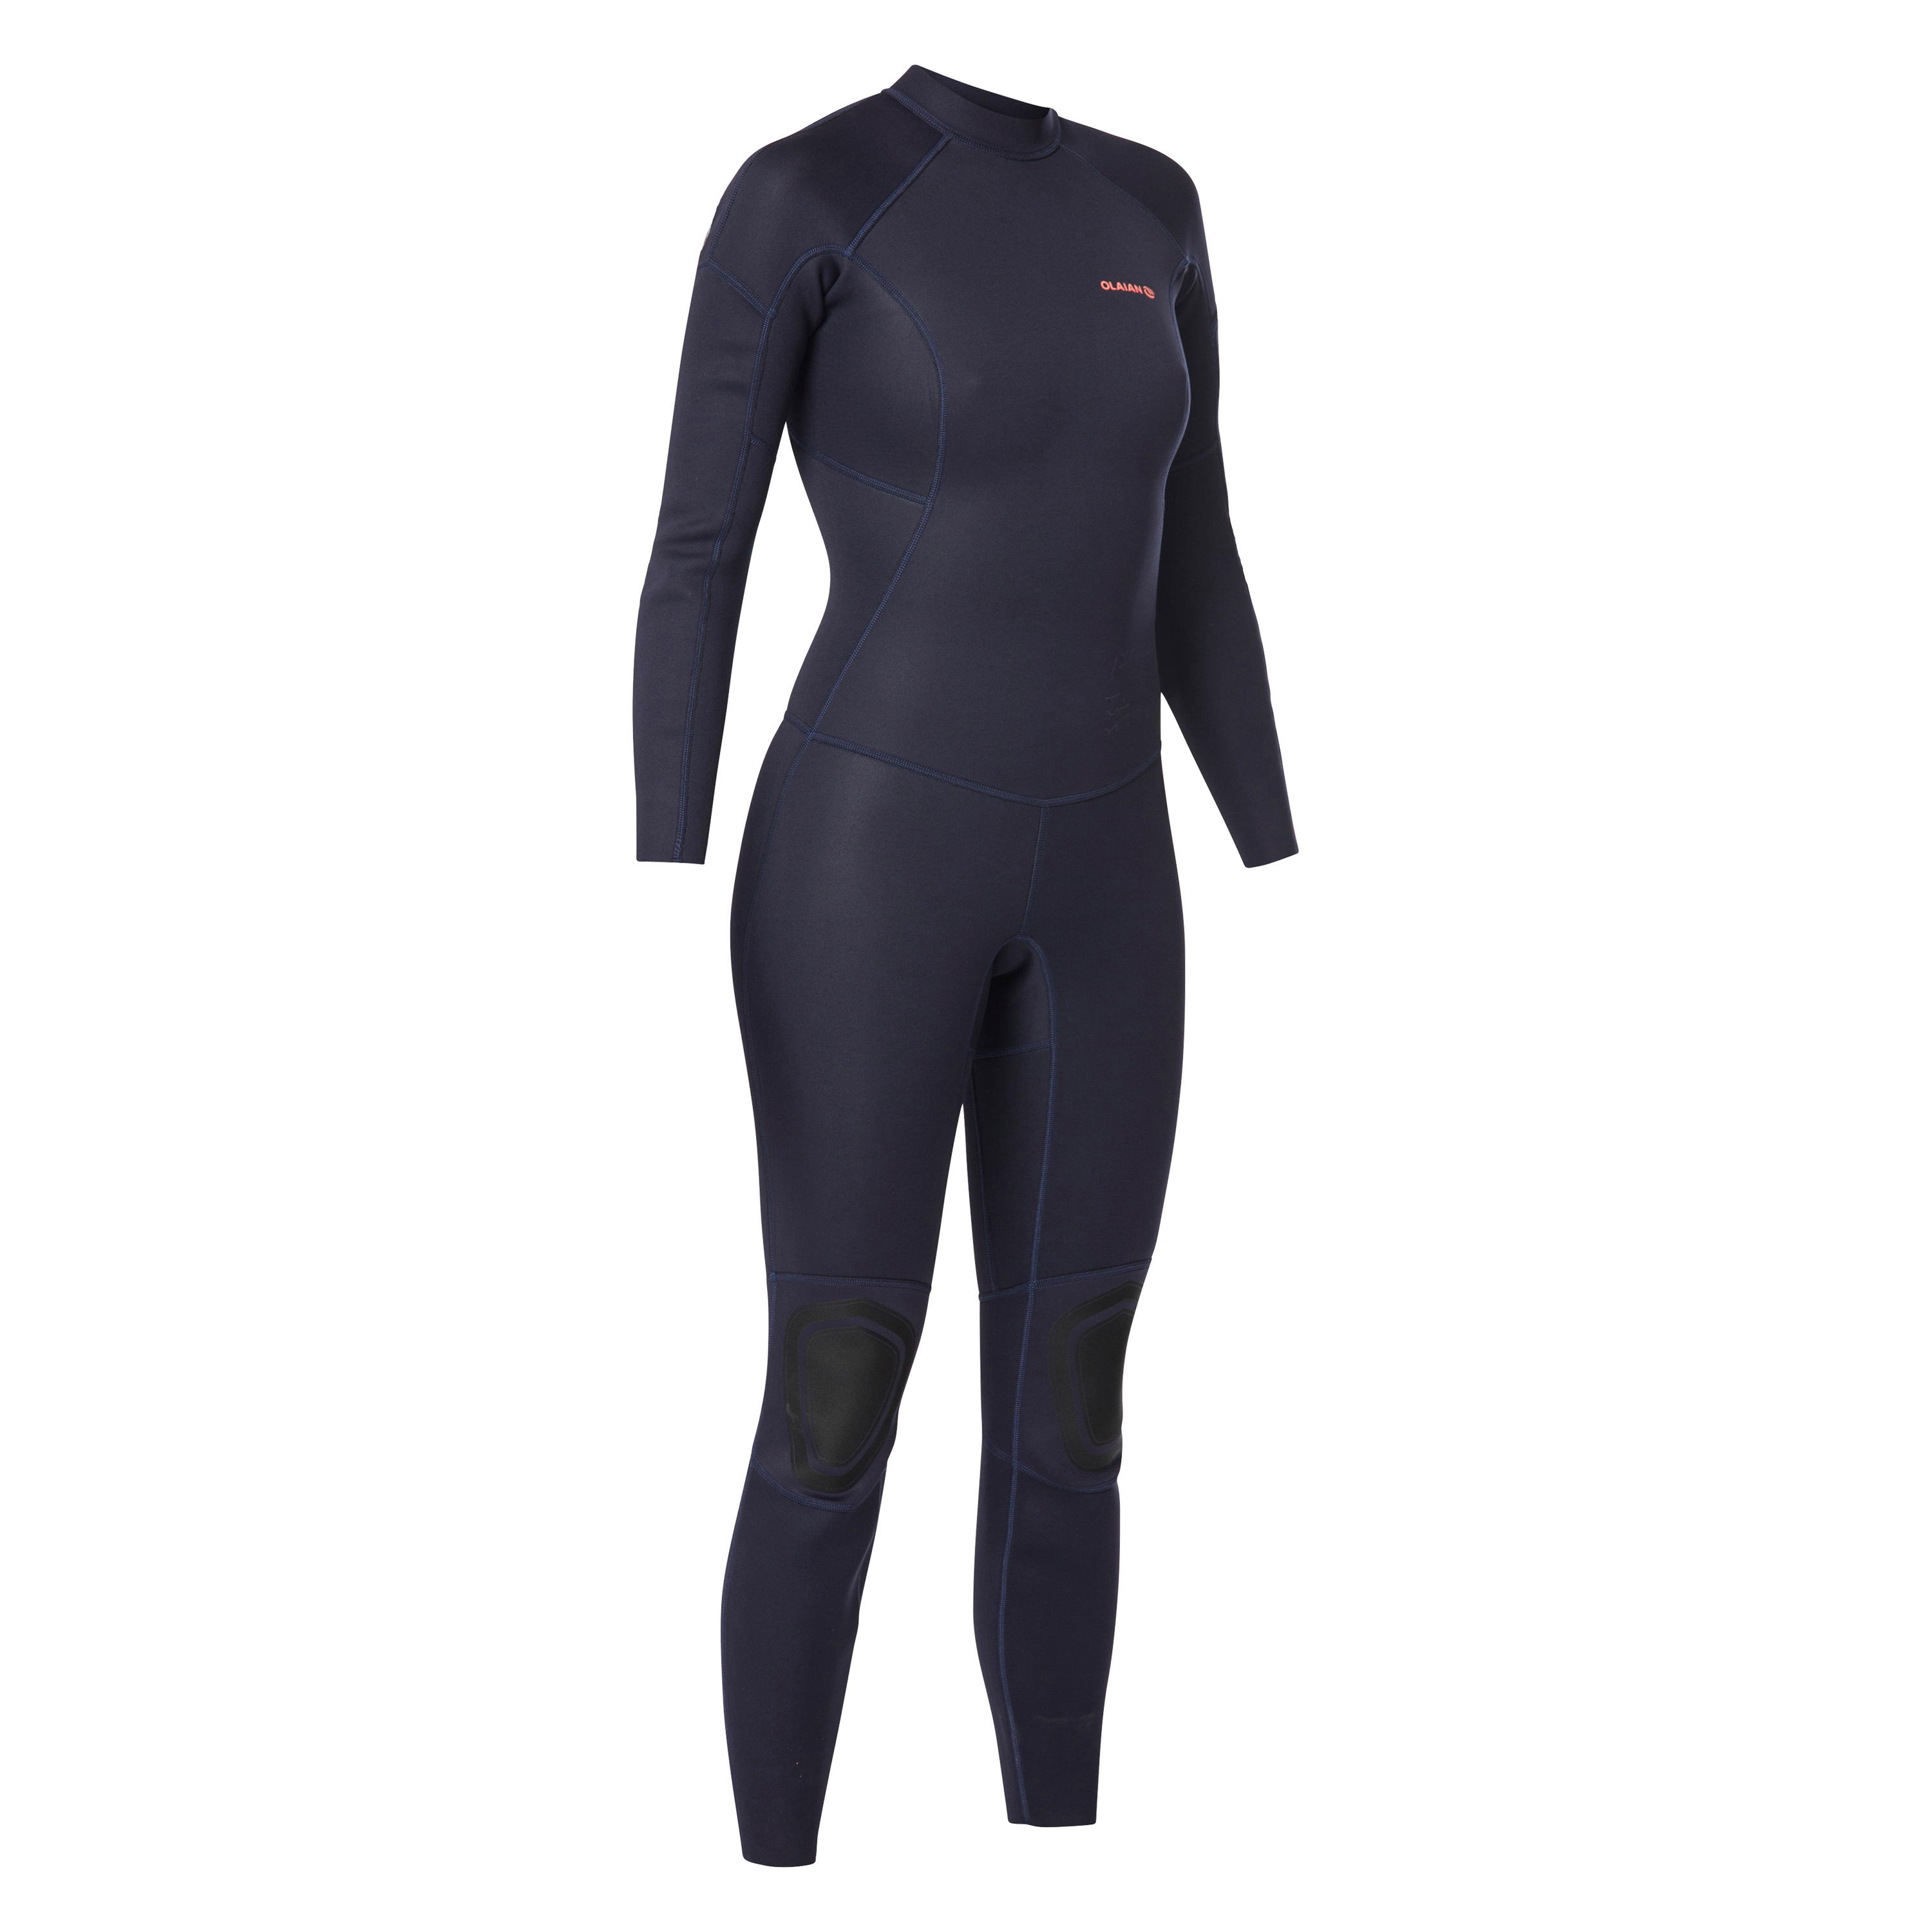 Women's 2/2 mm Wetsuit with Back Zip - 100 - OLAIAN